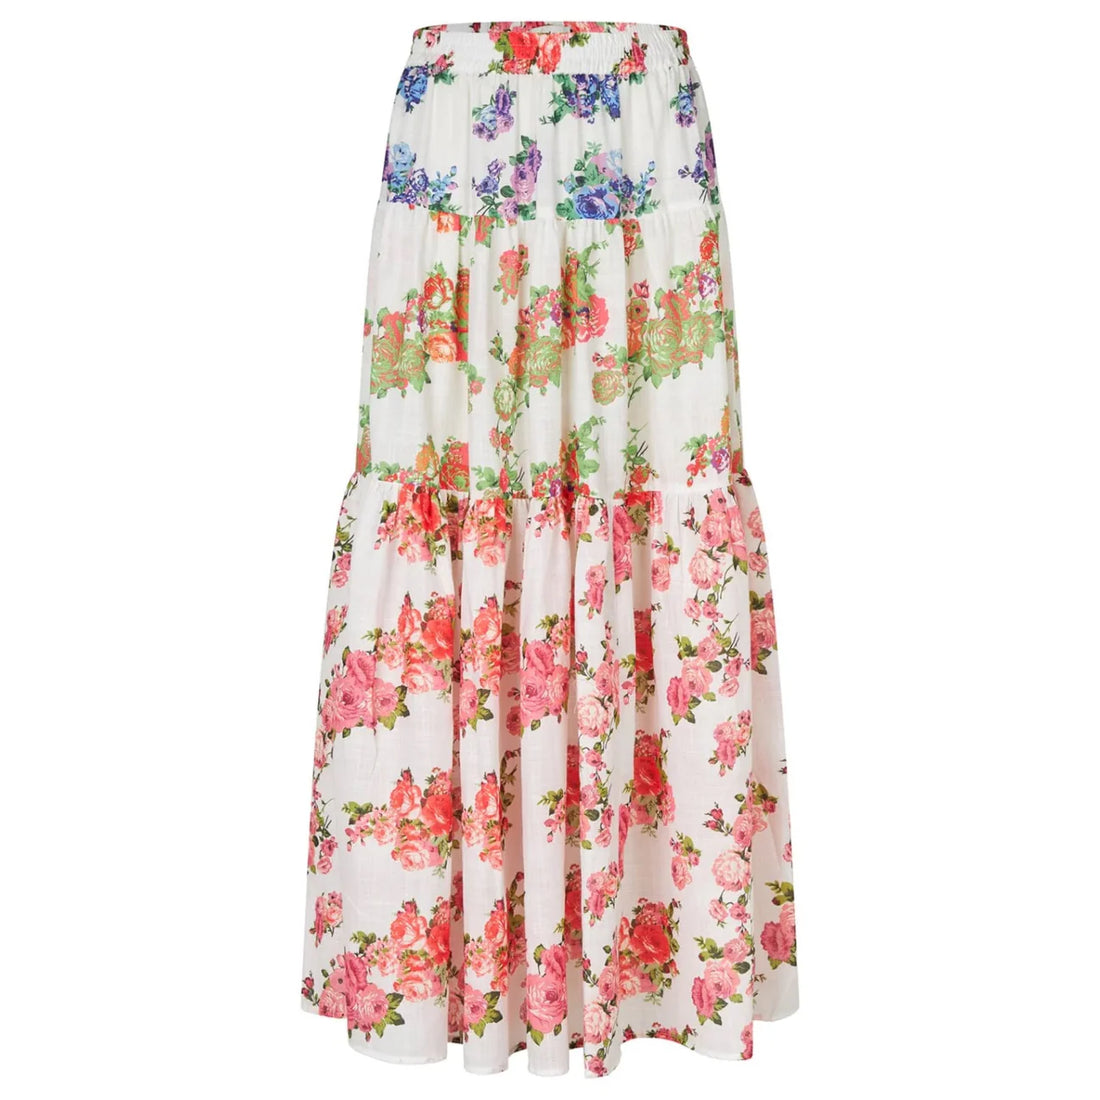 Shop the Sunset Print Maxi Skirt by Lollys Laundry at Jessimara.com